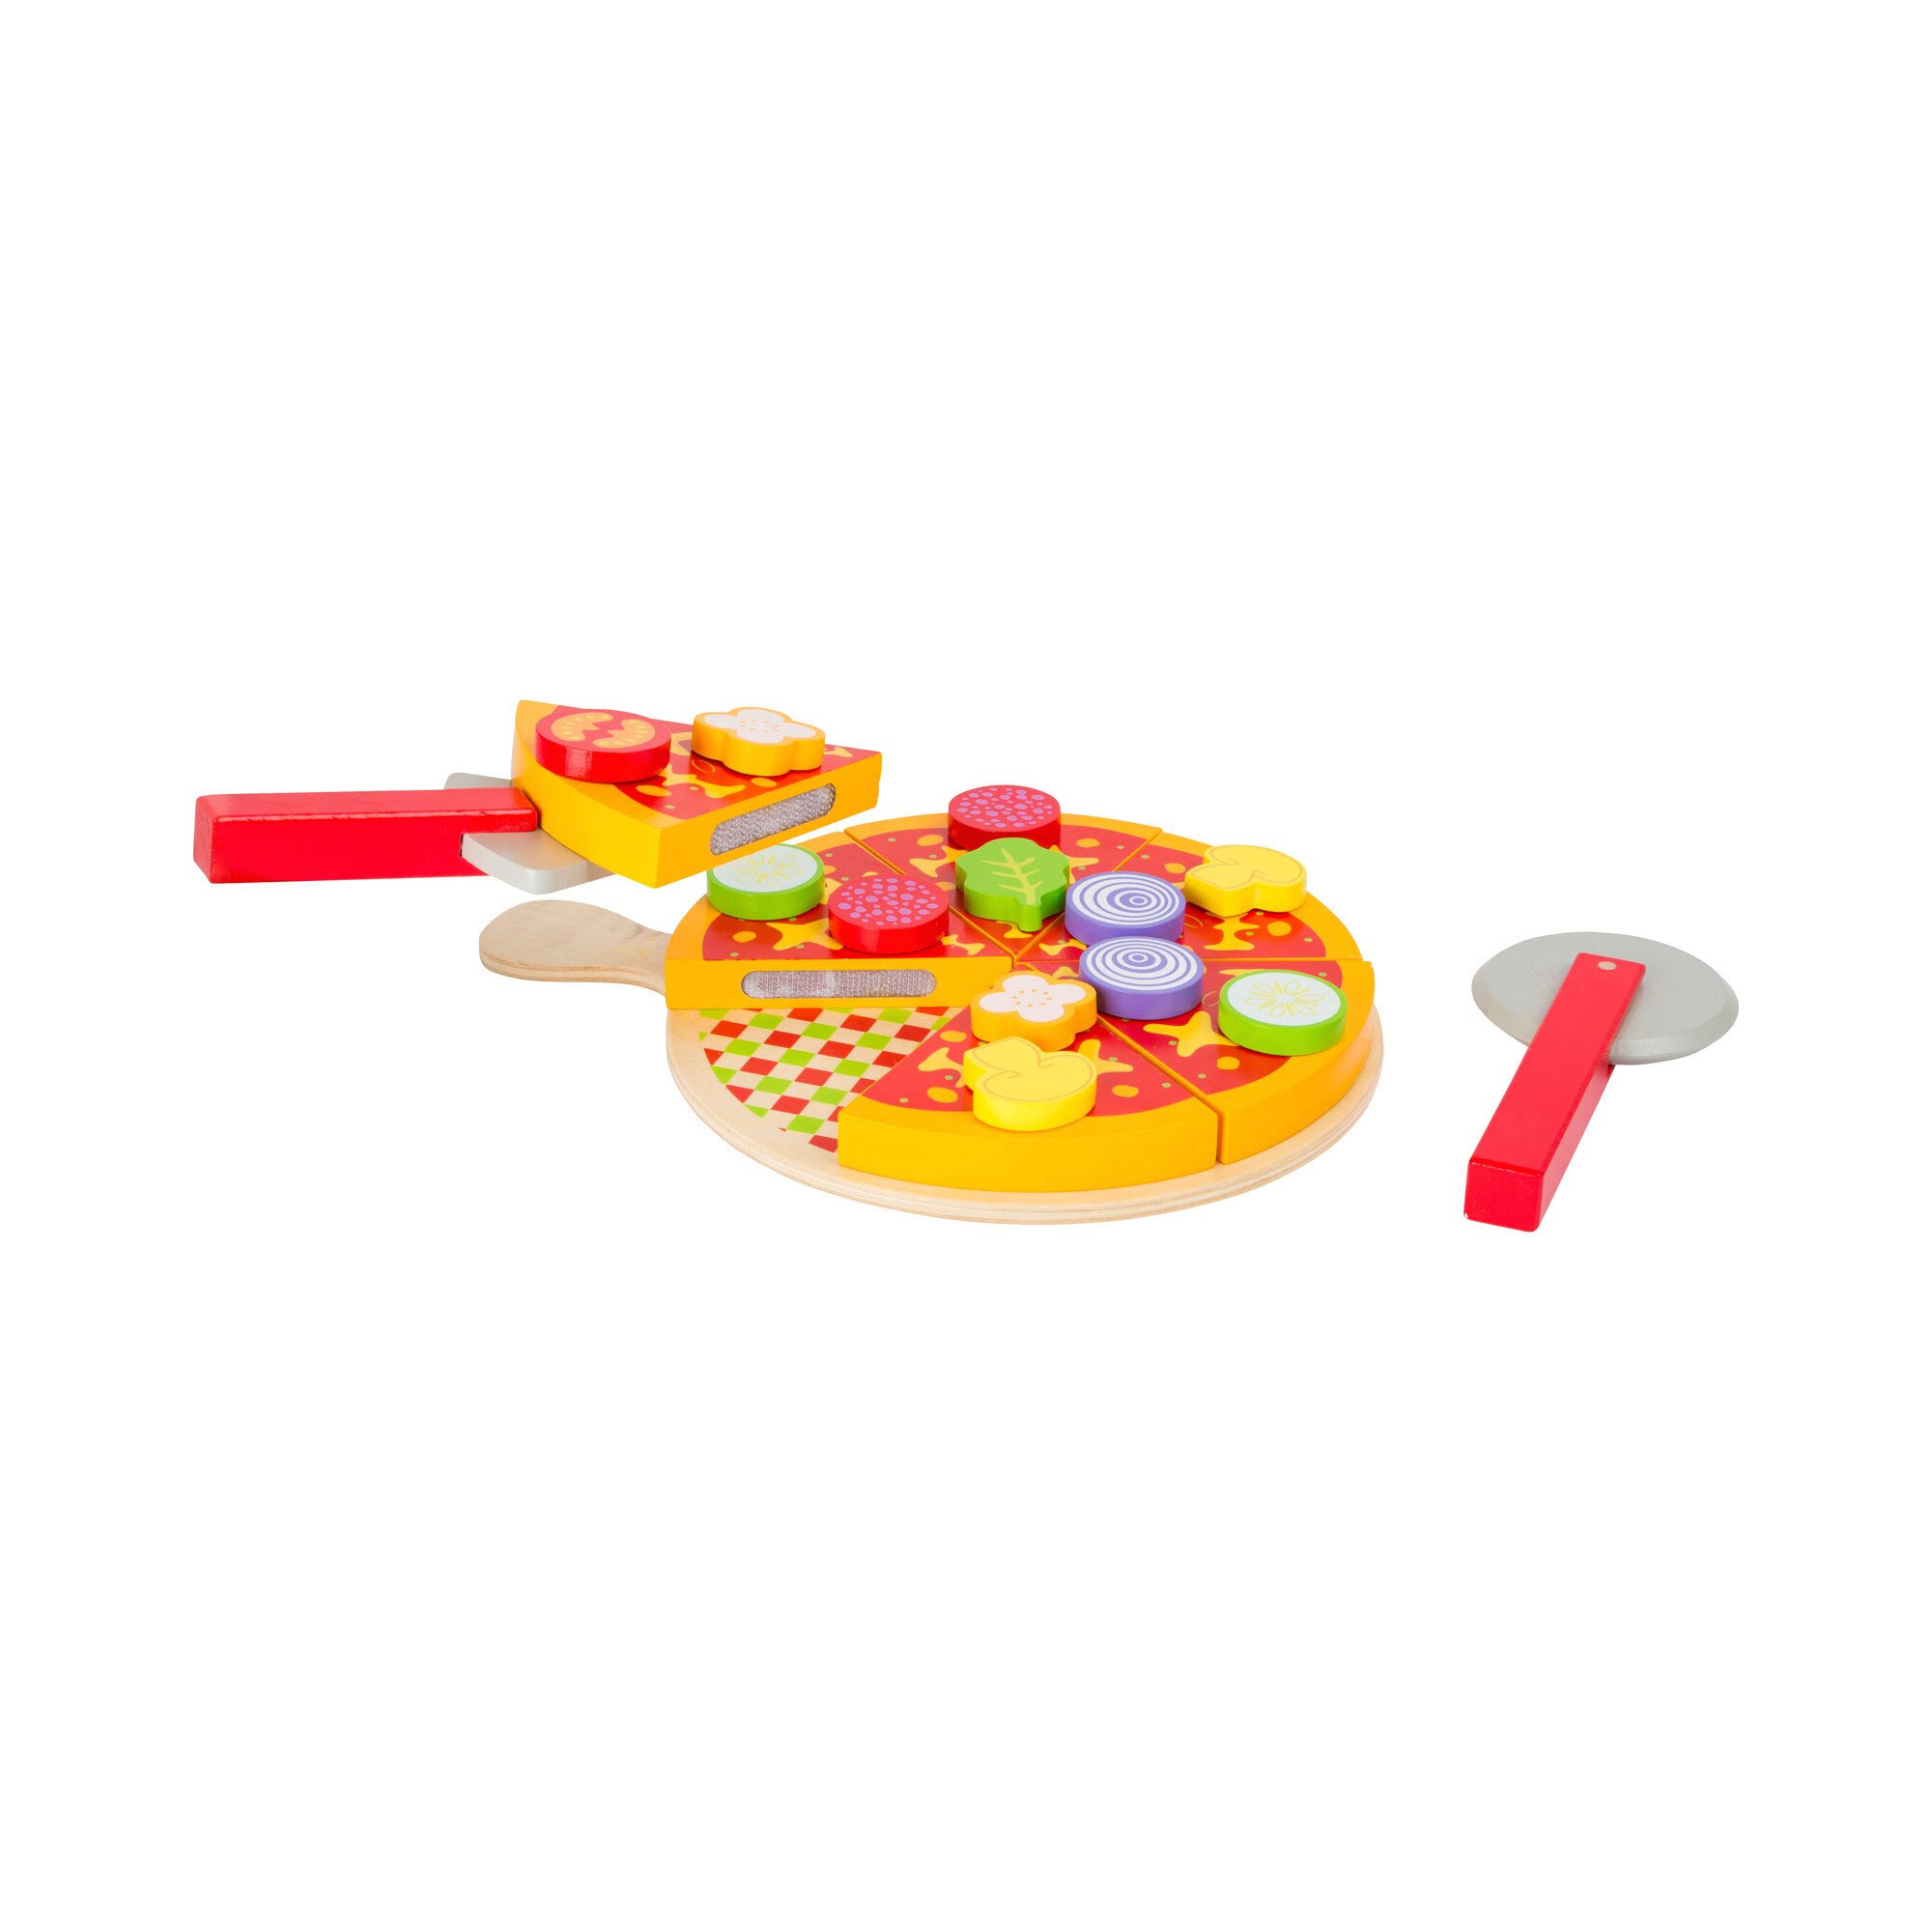 Small Foot Wooden Toys - 21 Piece Pizza Cutting Playset